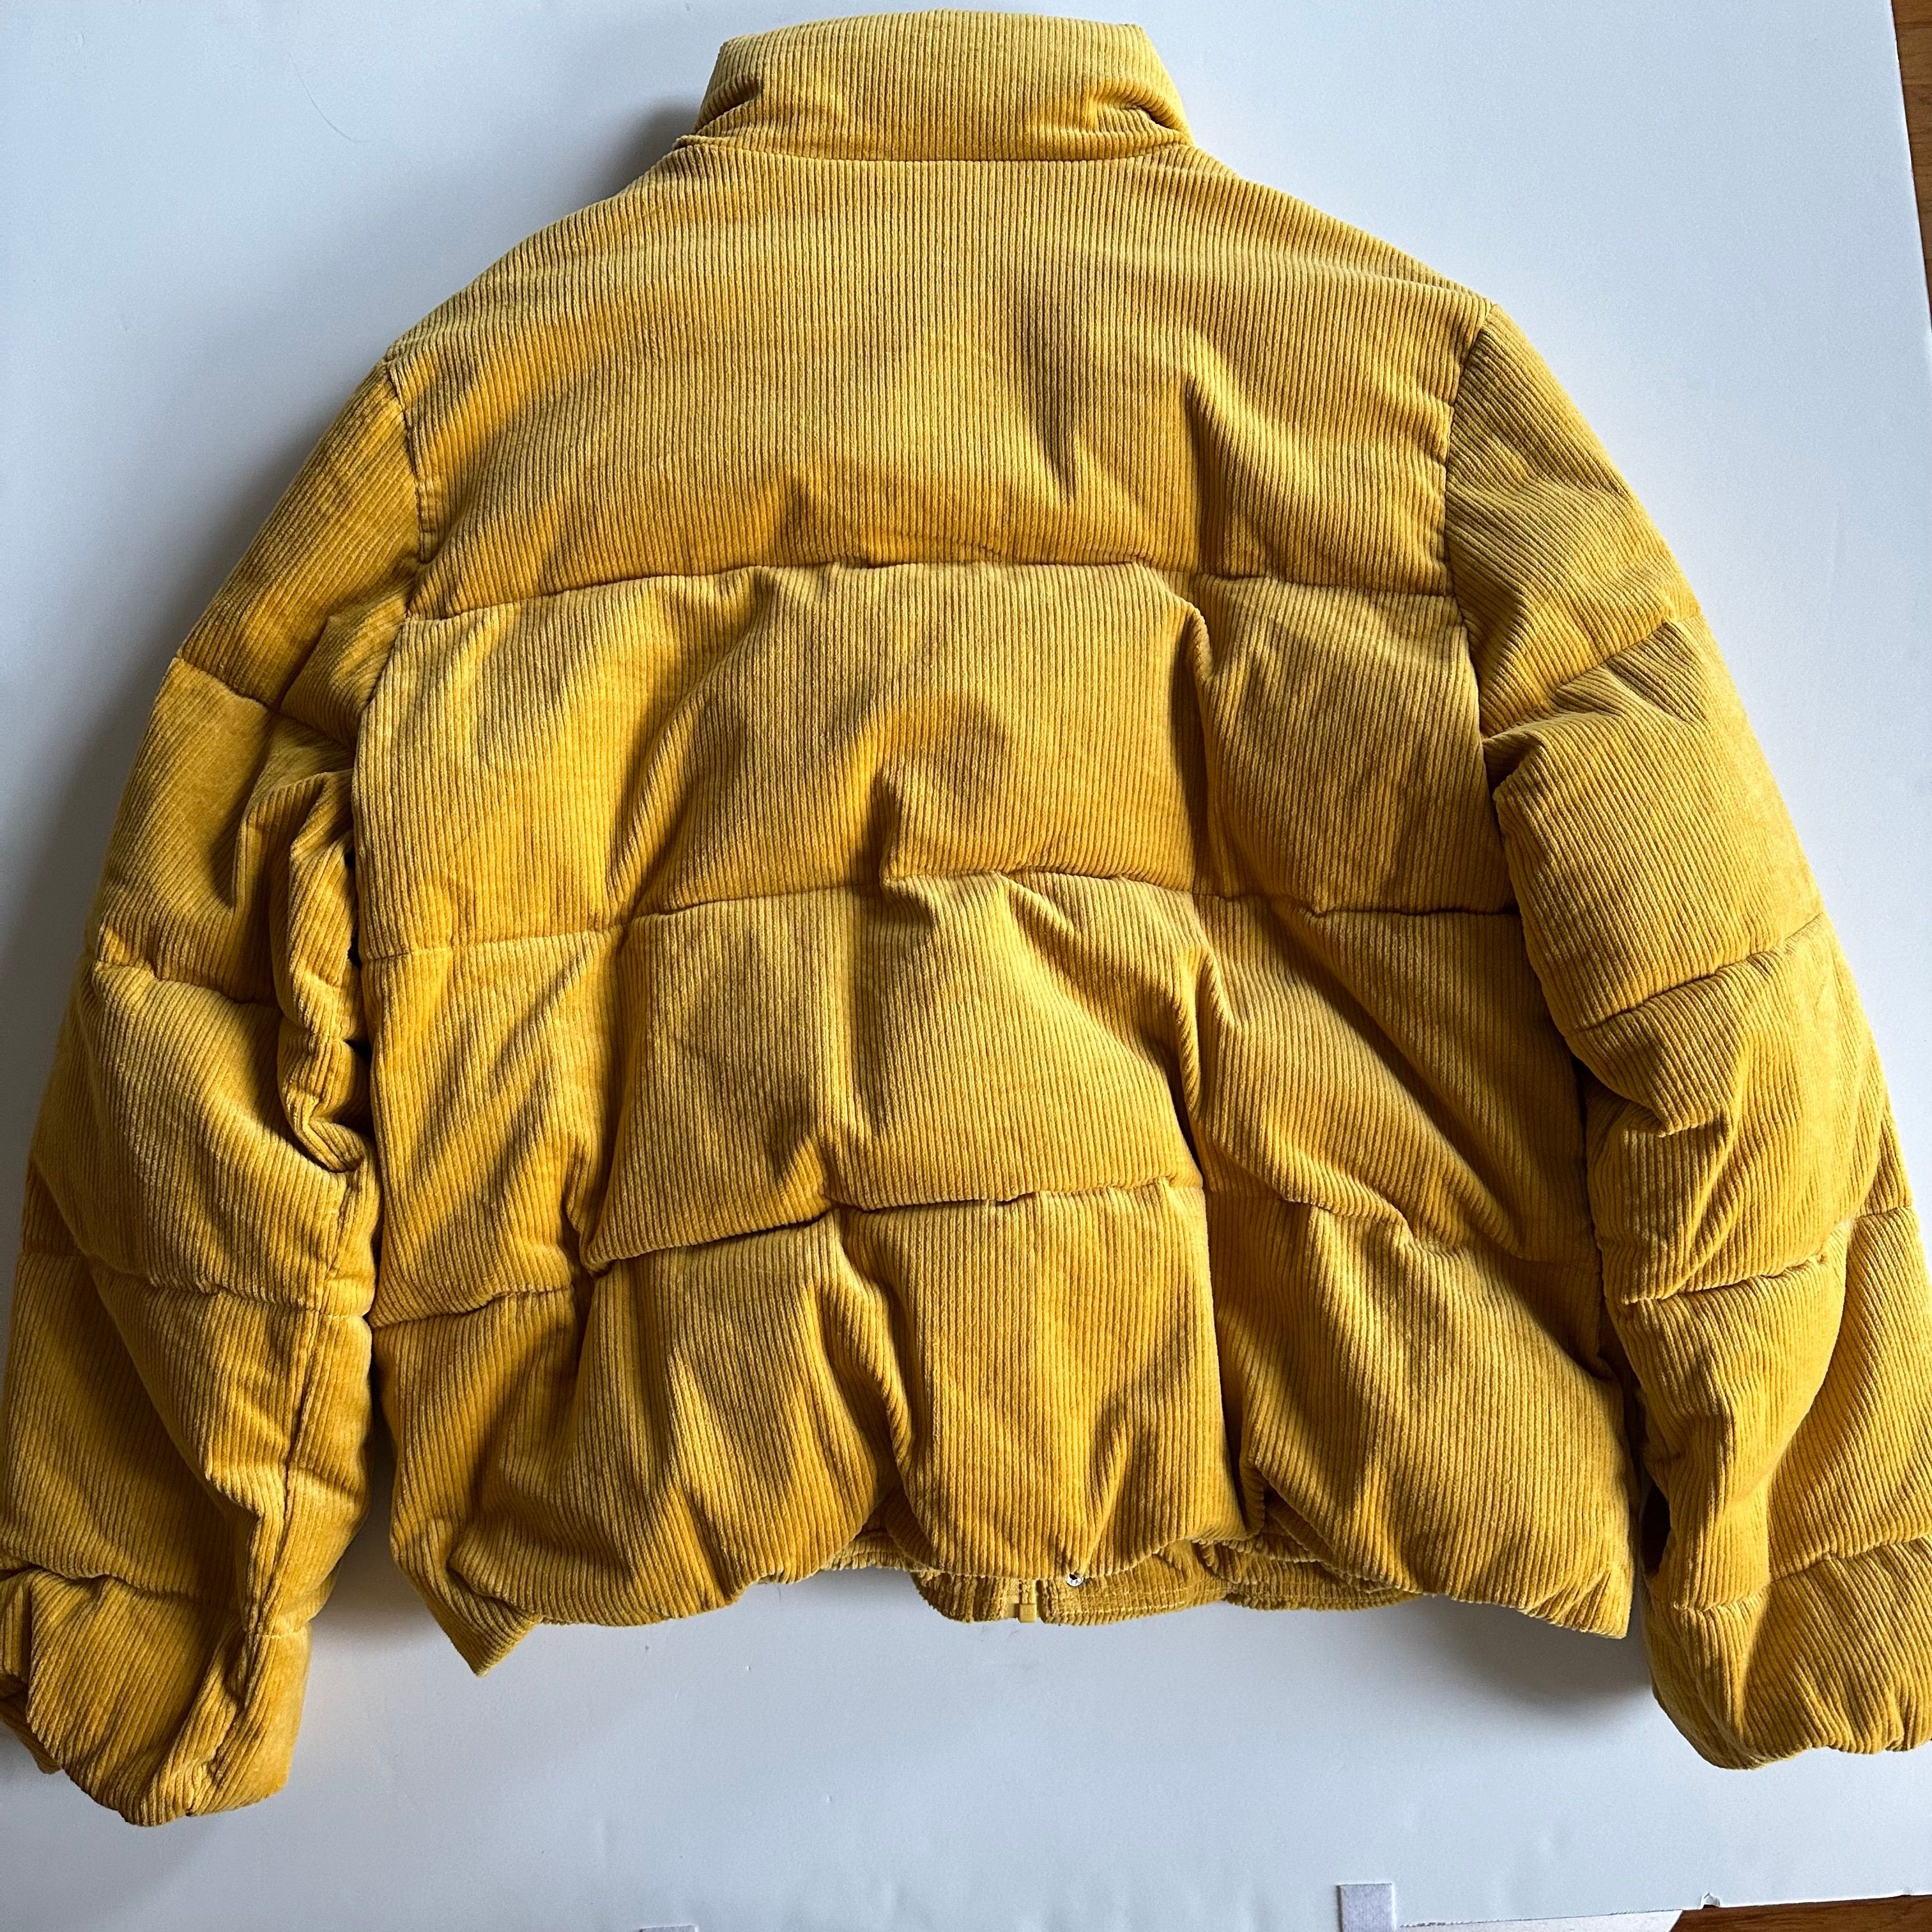 Native Youth NATIVE YOUTH Yellow Pathfinder Corduroy Puffer Jacket Size US XL / EU 56 / 4 - 9 Preview